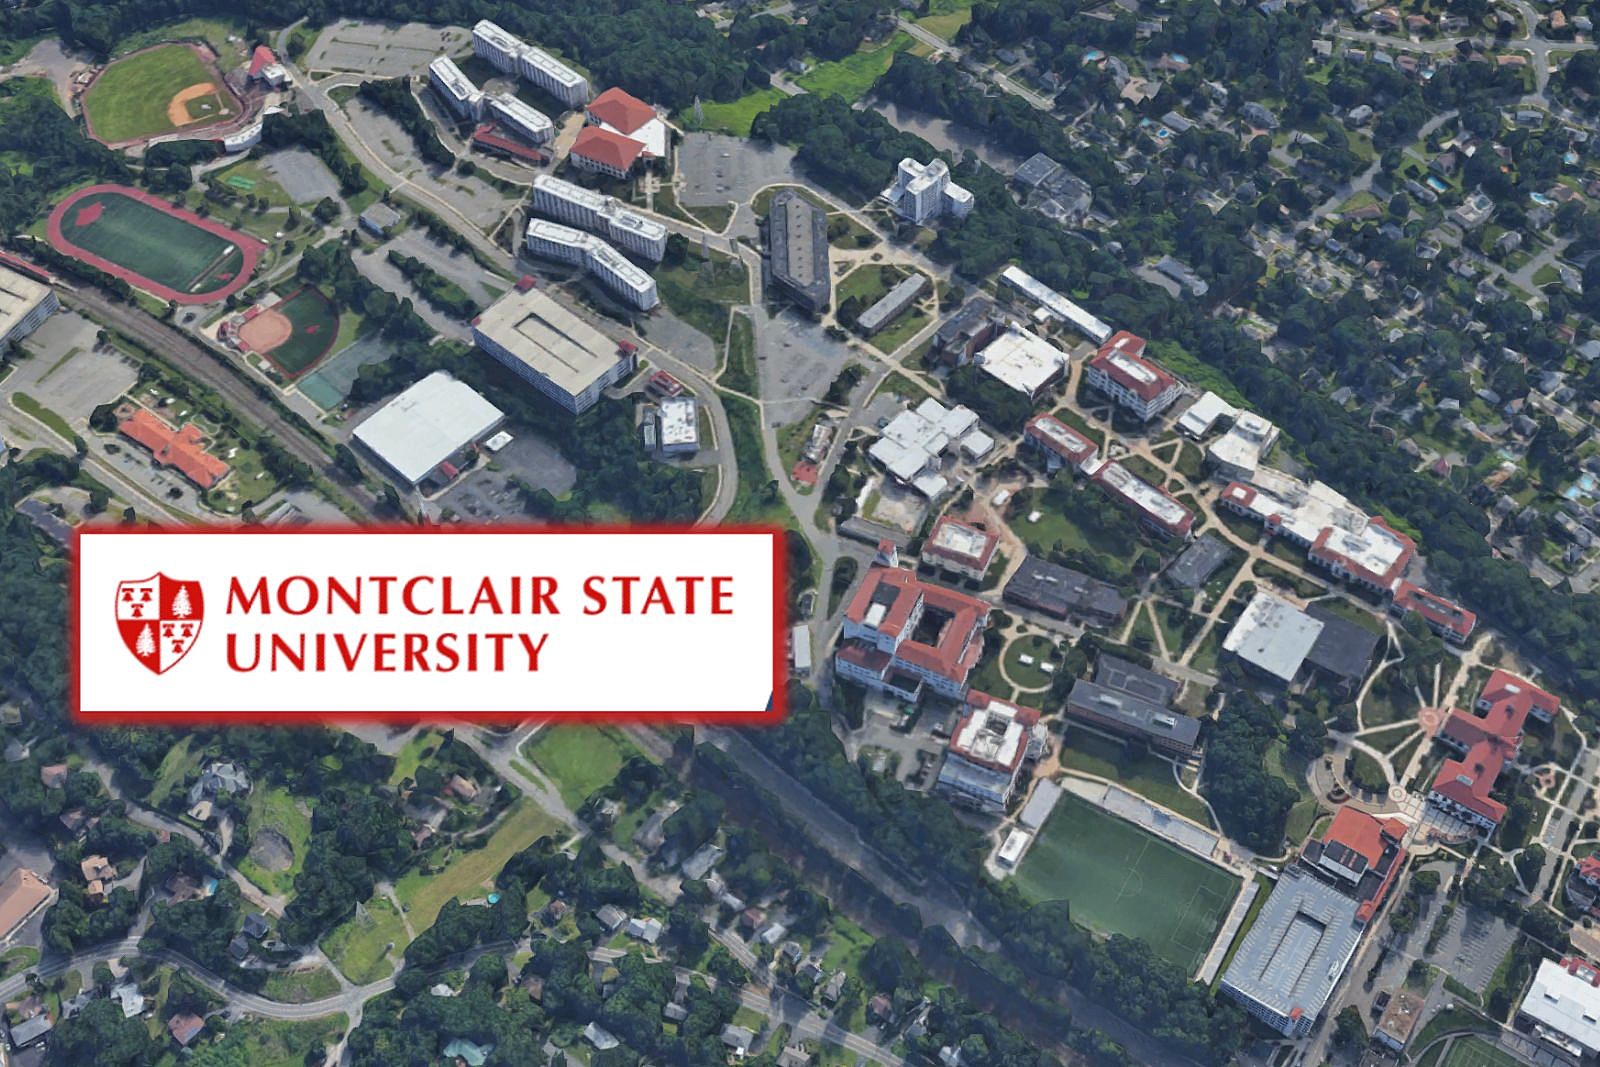 Another Montclair University, NJ student charged with child porn pic